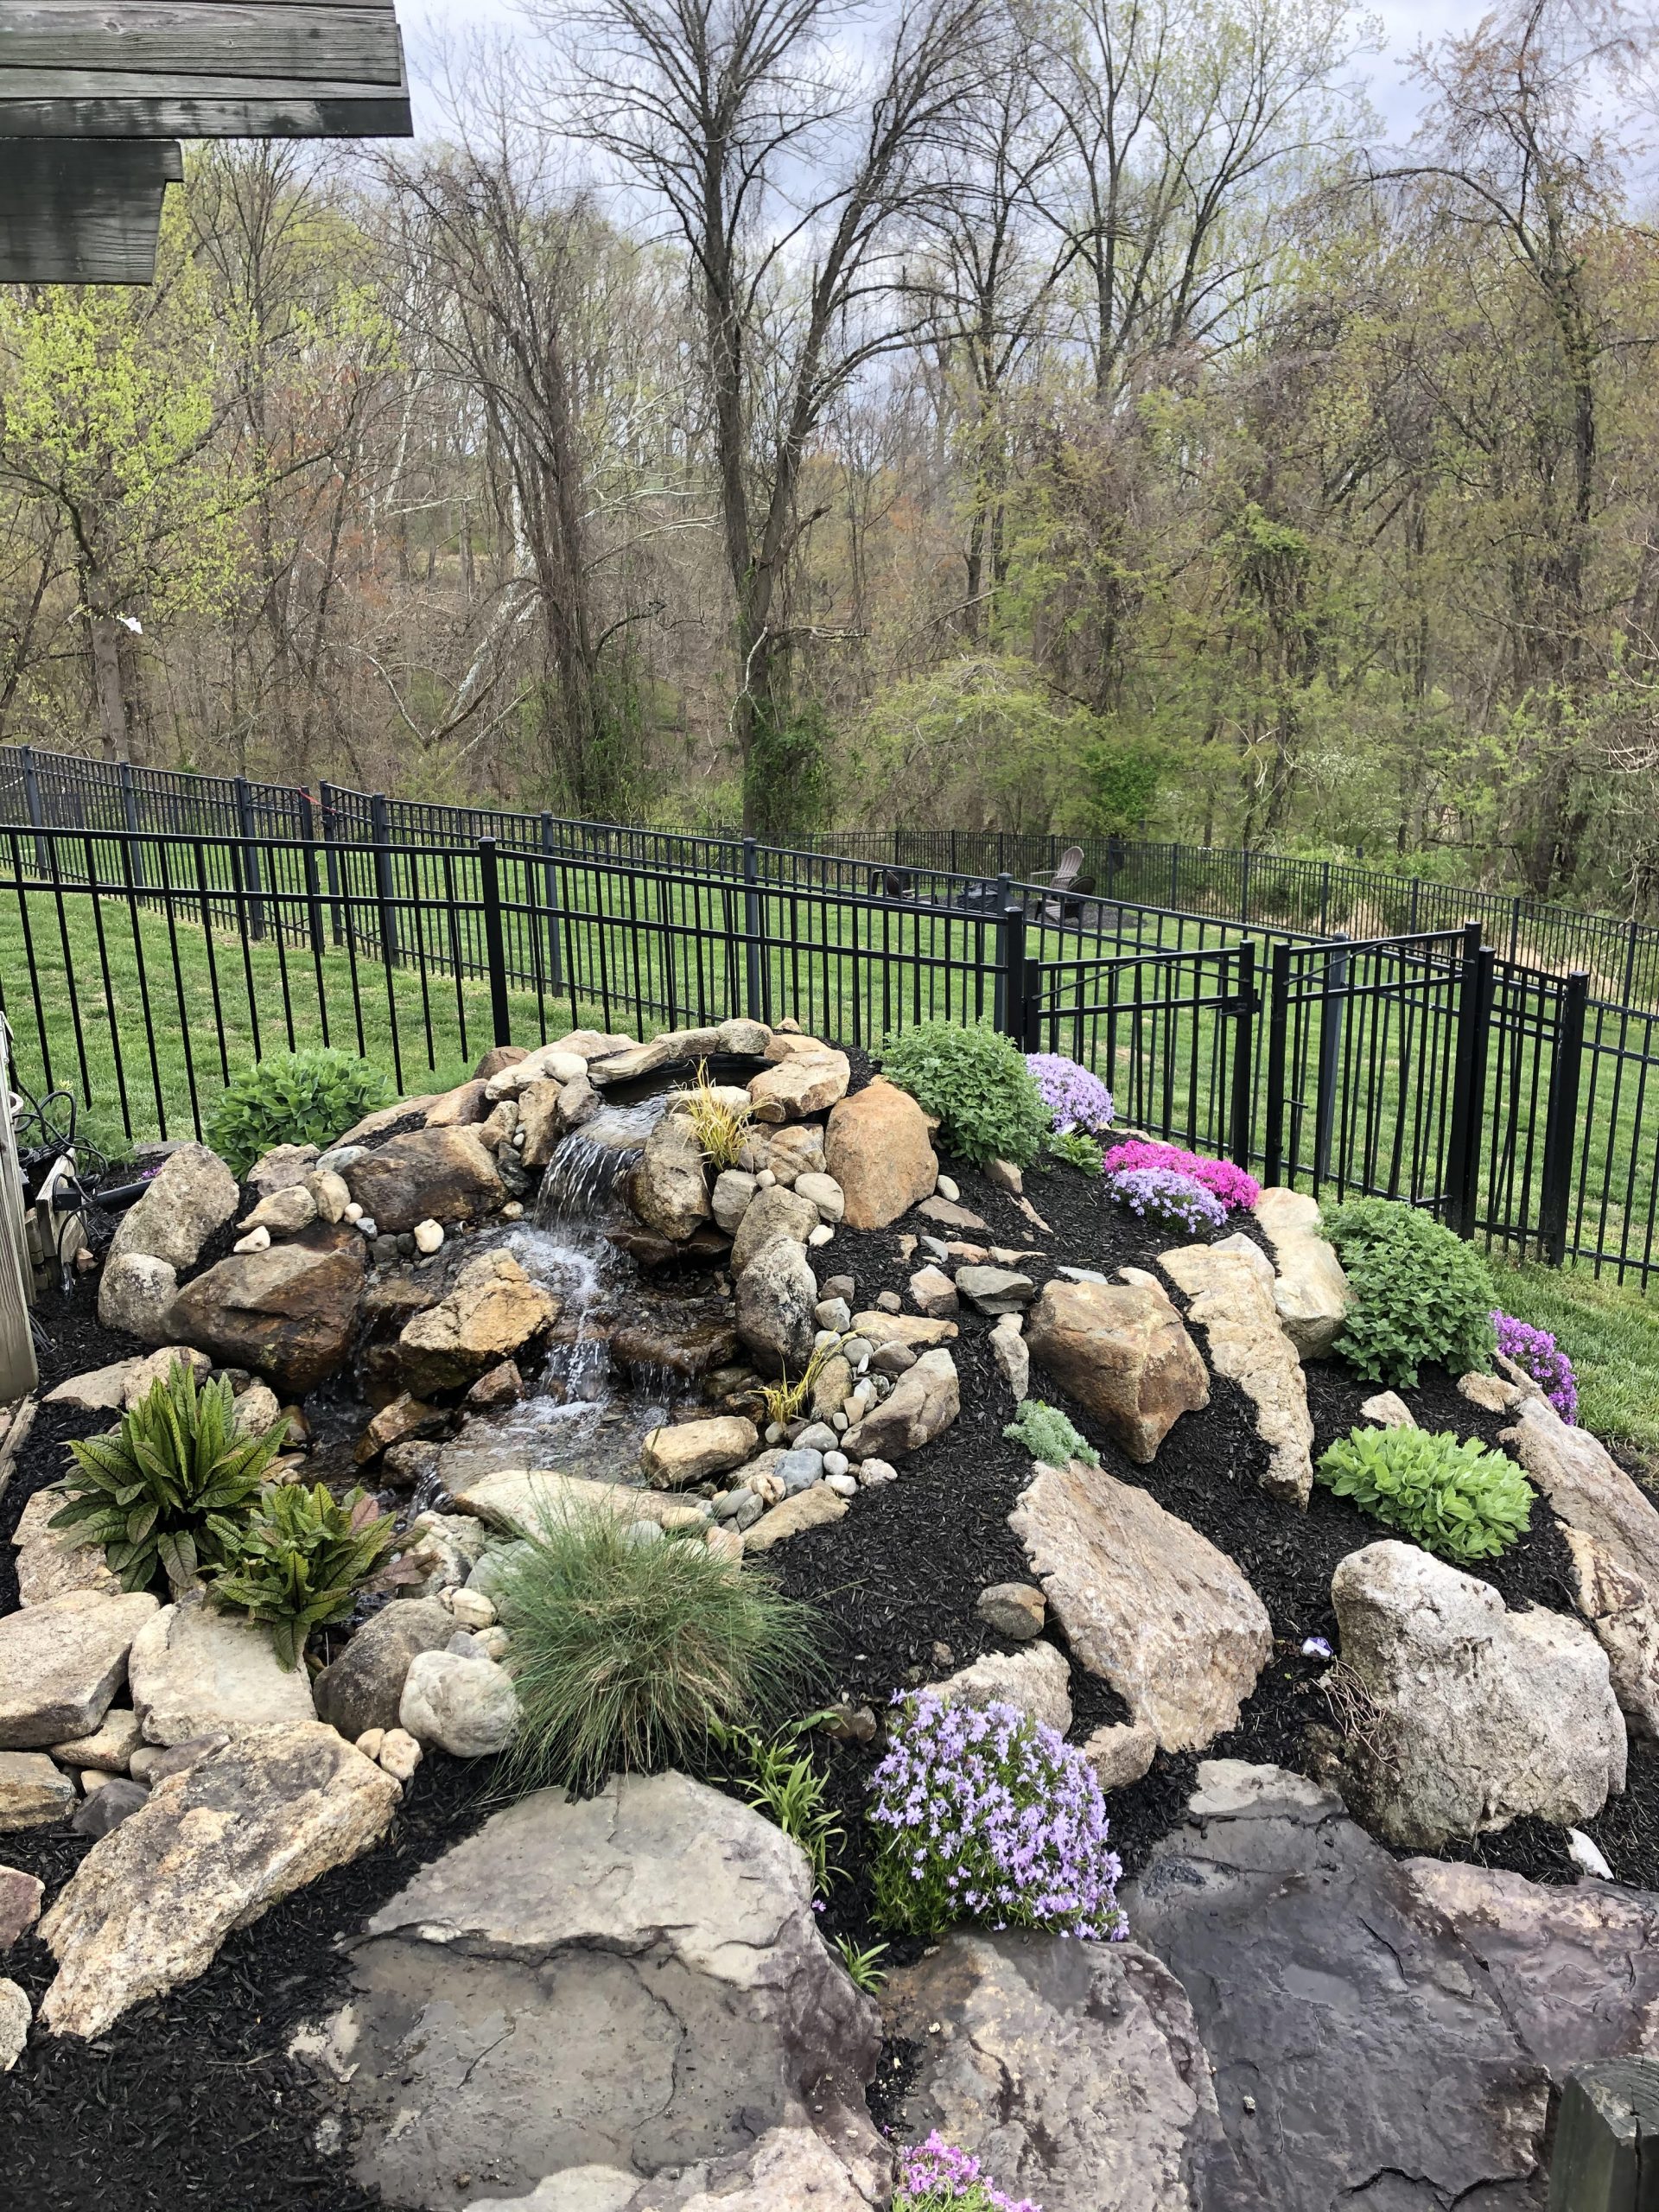 West Chester, PA Residential & Commercial Landscaping Services, Residential Landscaping Contractor & Commercial Landscaping Contractor. Professional Landscape Designer